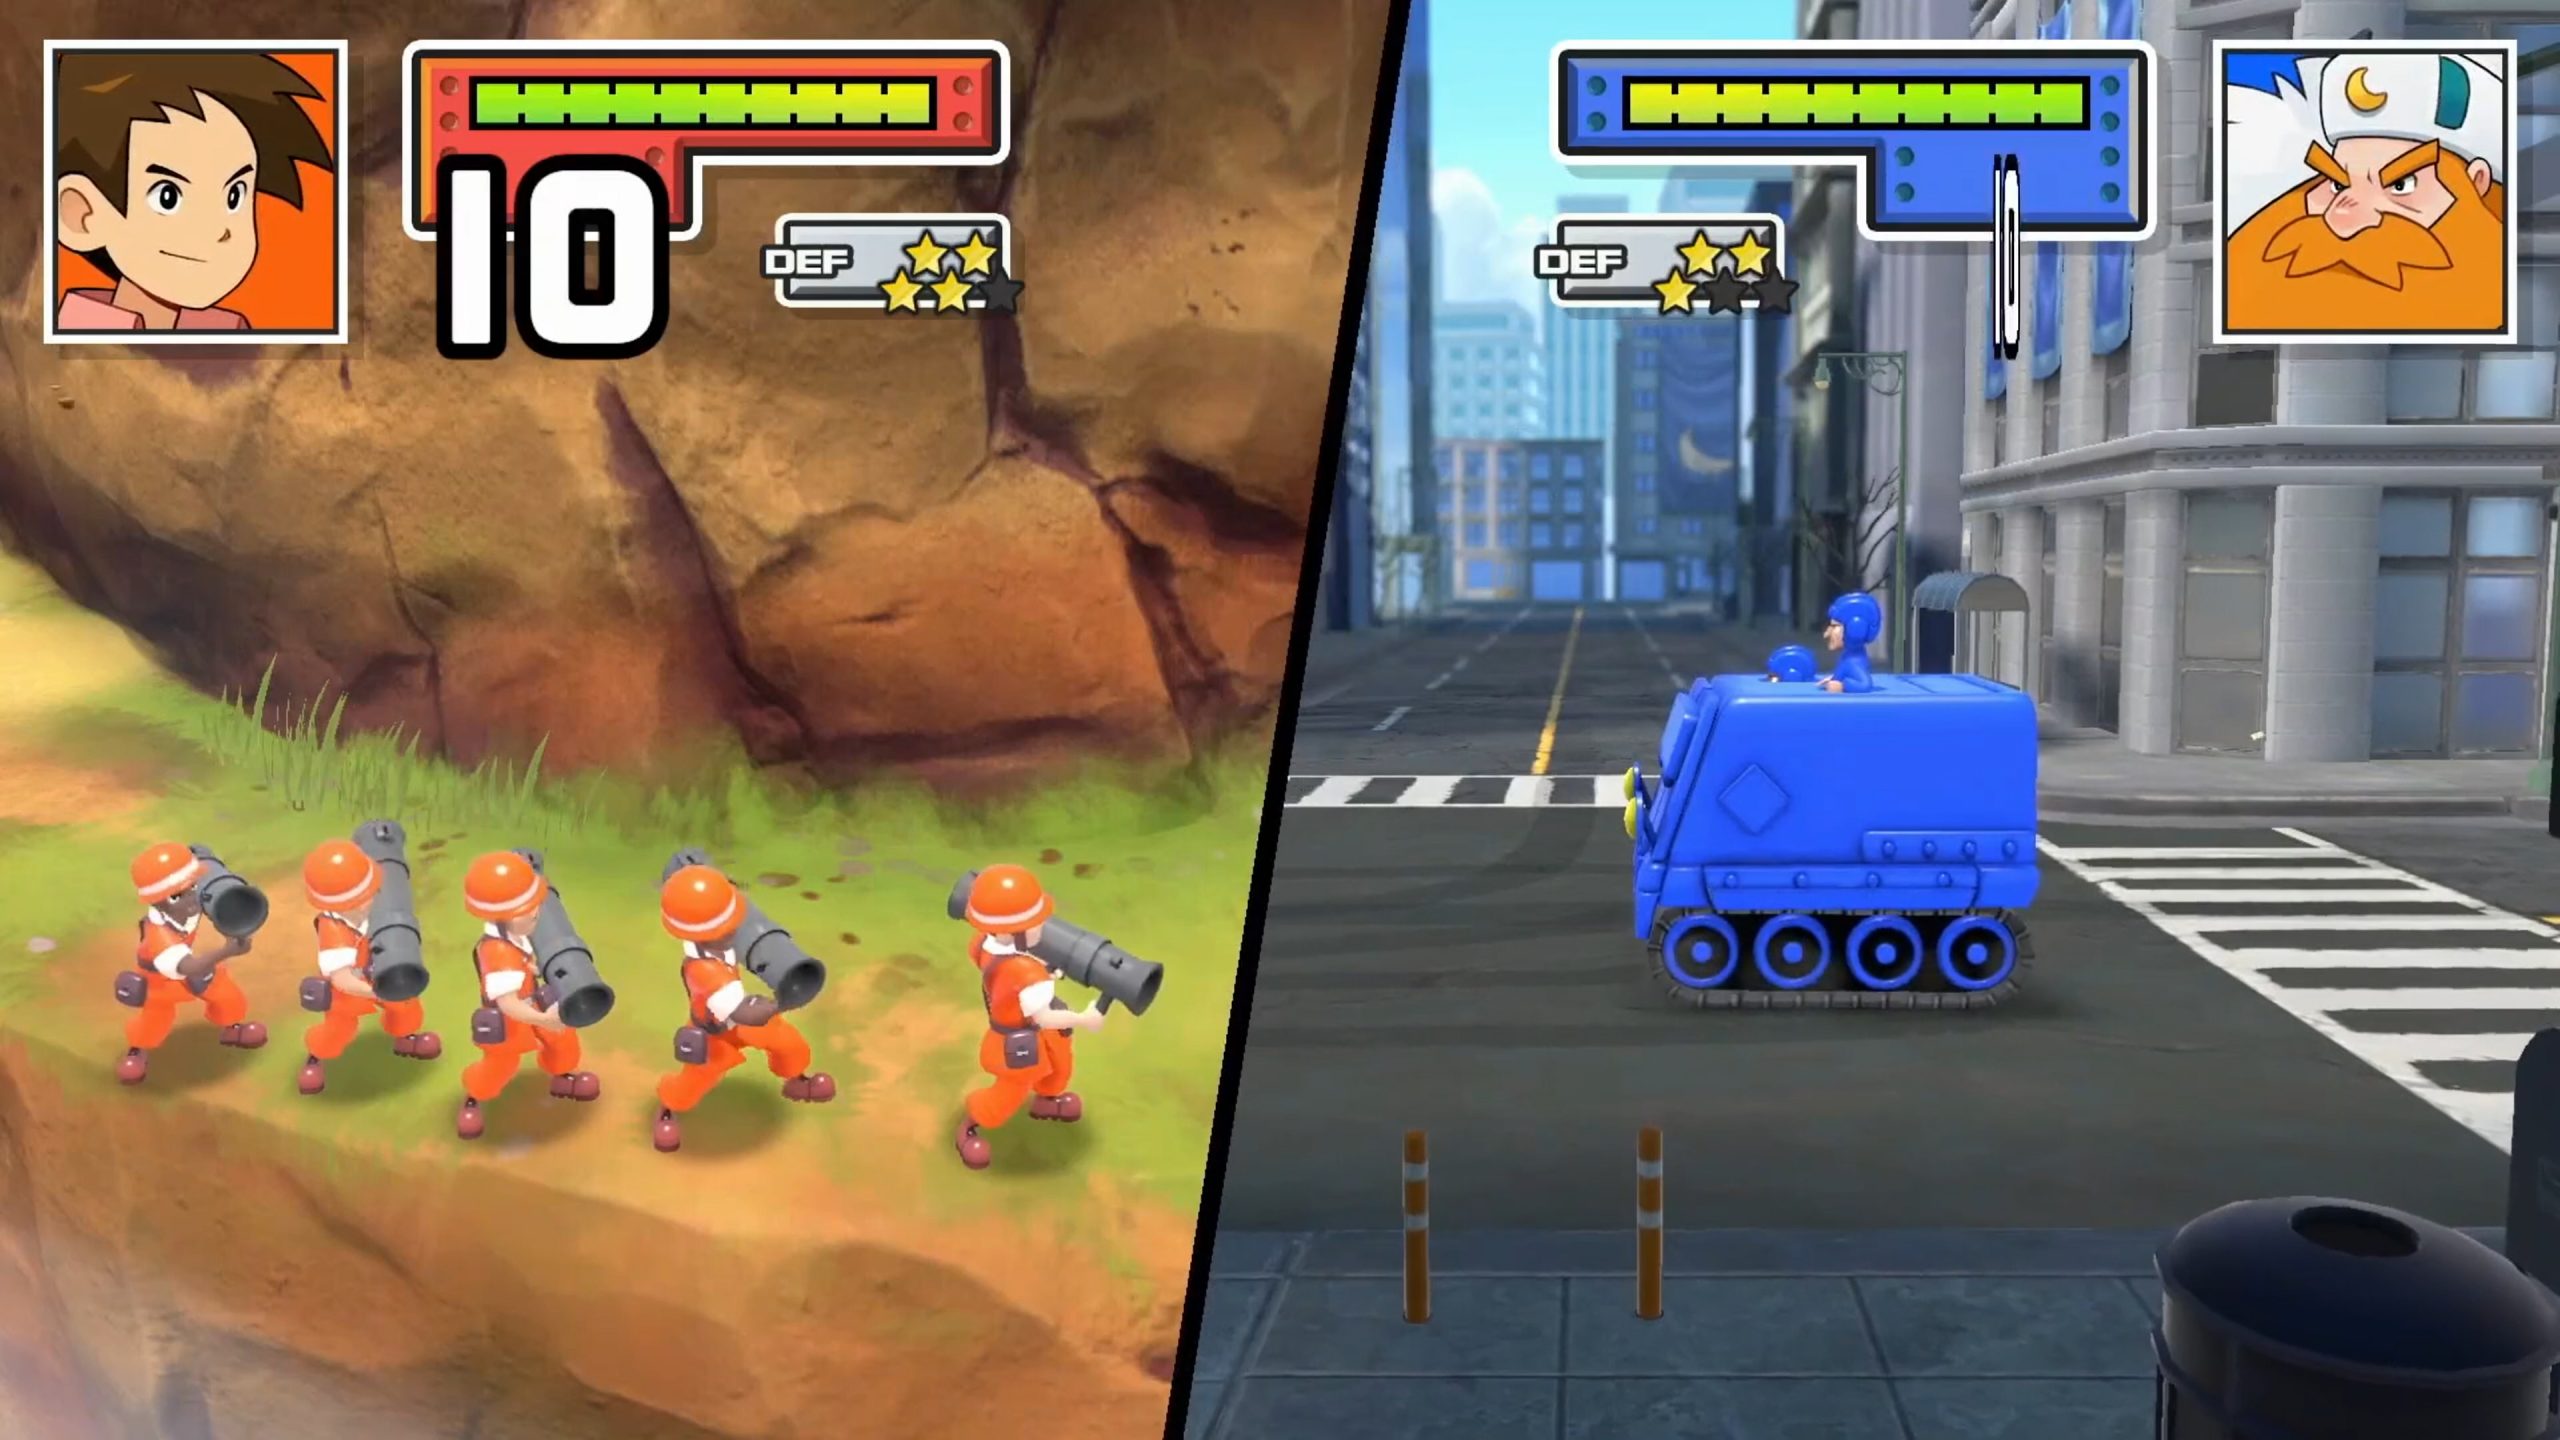 Advance Wars 1 + 2 Re-Boot Camp announced for Switch